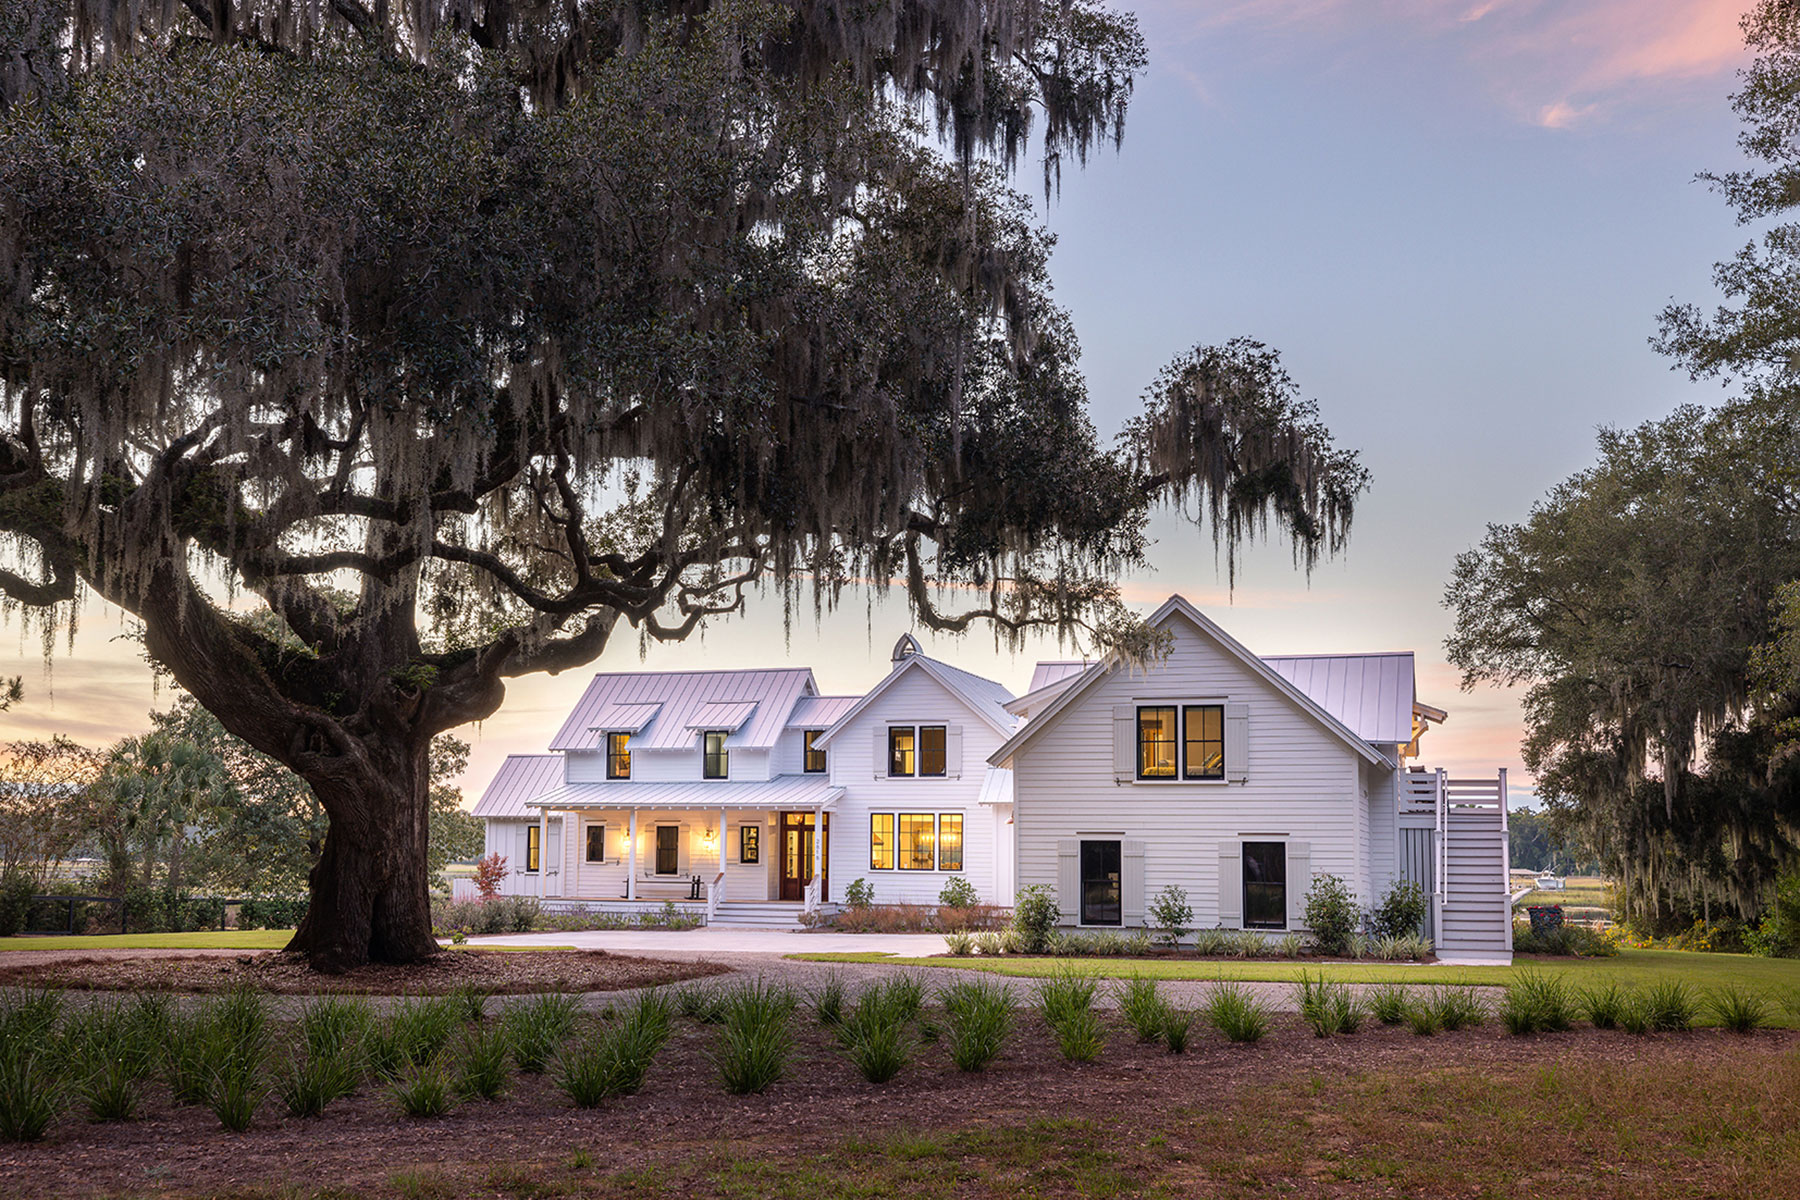 Custom home at sunset with large Grand Oak in the front of the property